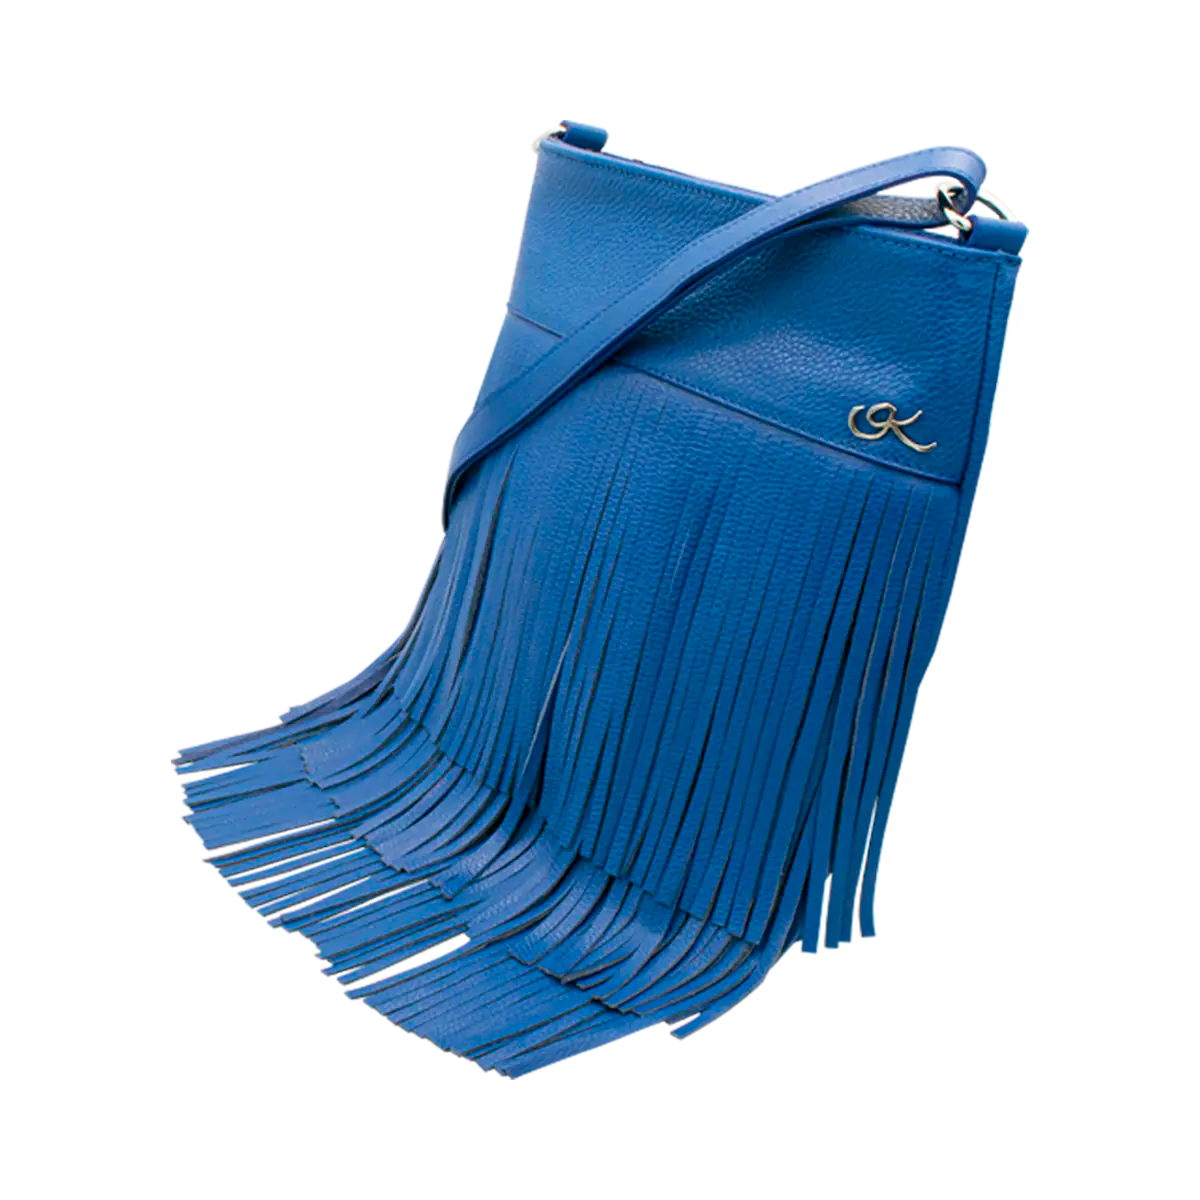 blue leather shoulder bag with 3 layers of fringe. Fashion accessories, for women in San Diego, CA.